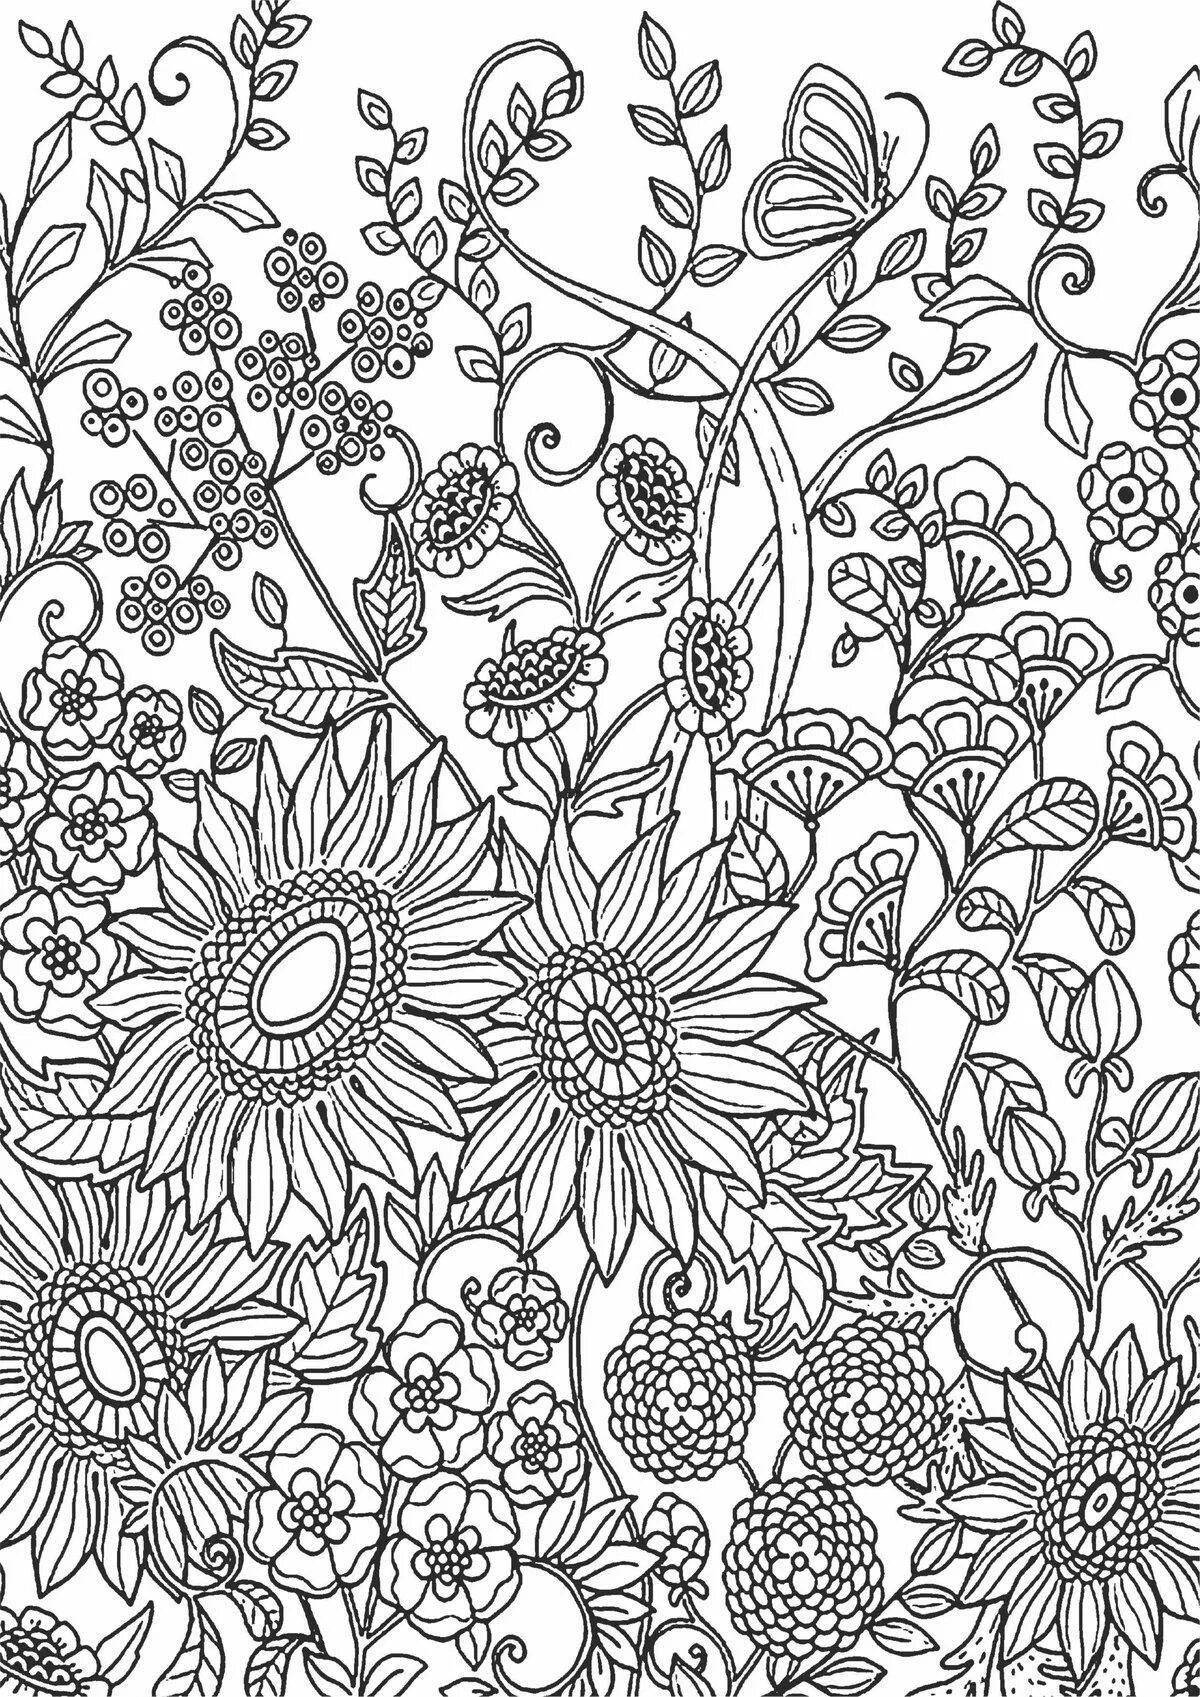 Exquisite anti-stress coloring book for adults